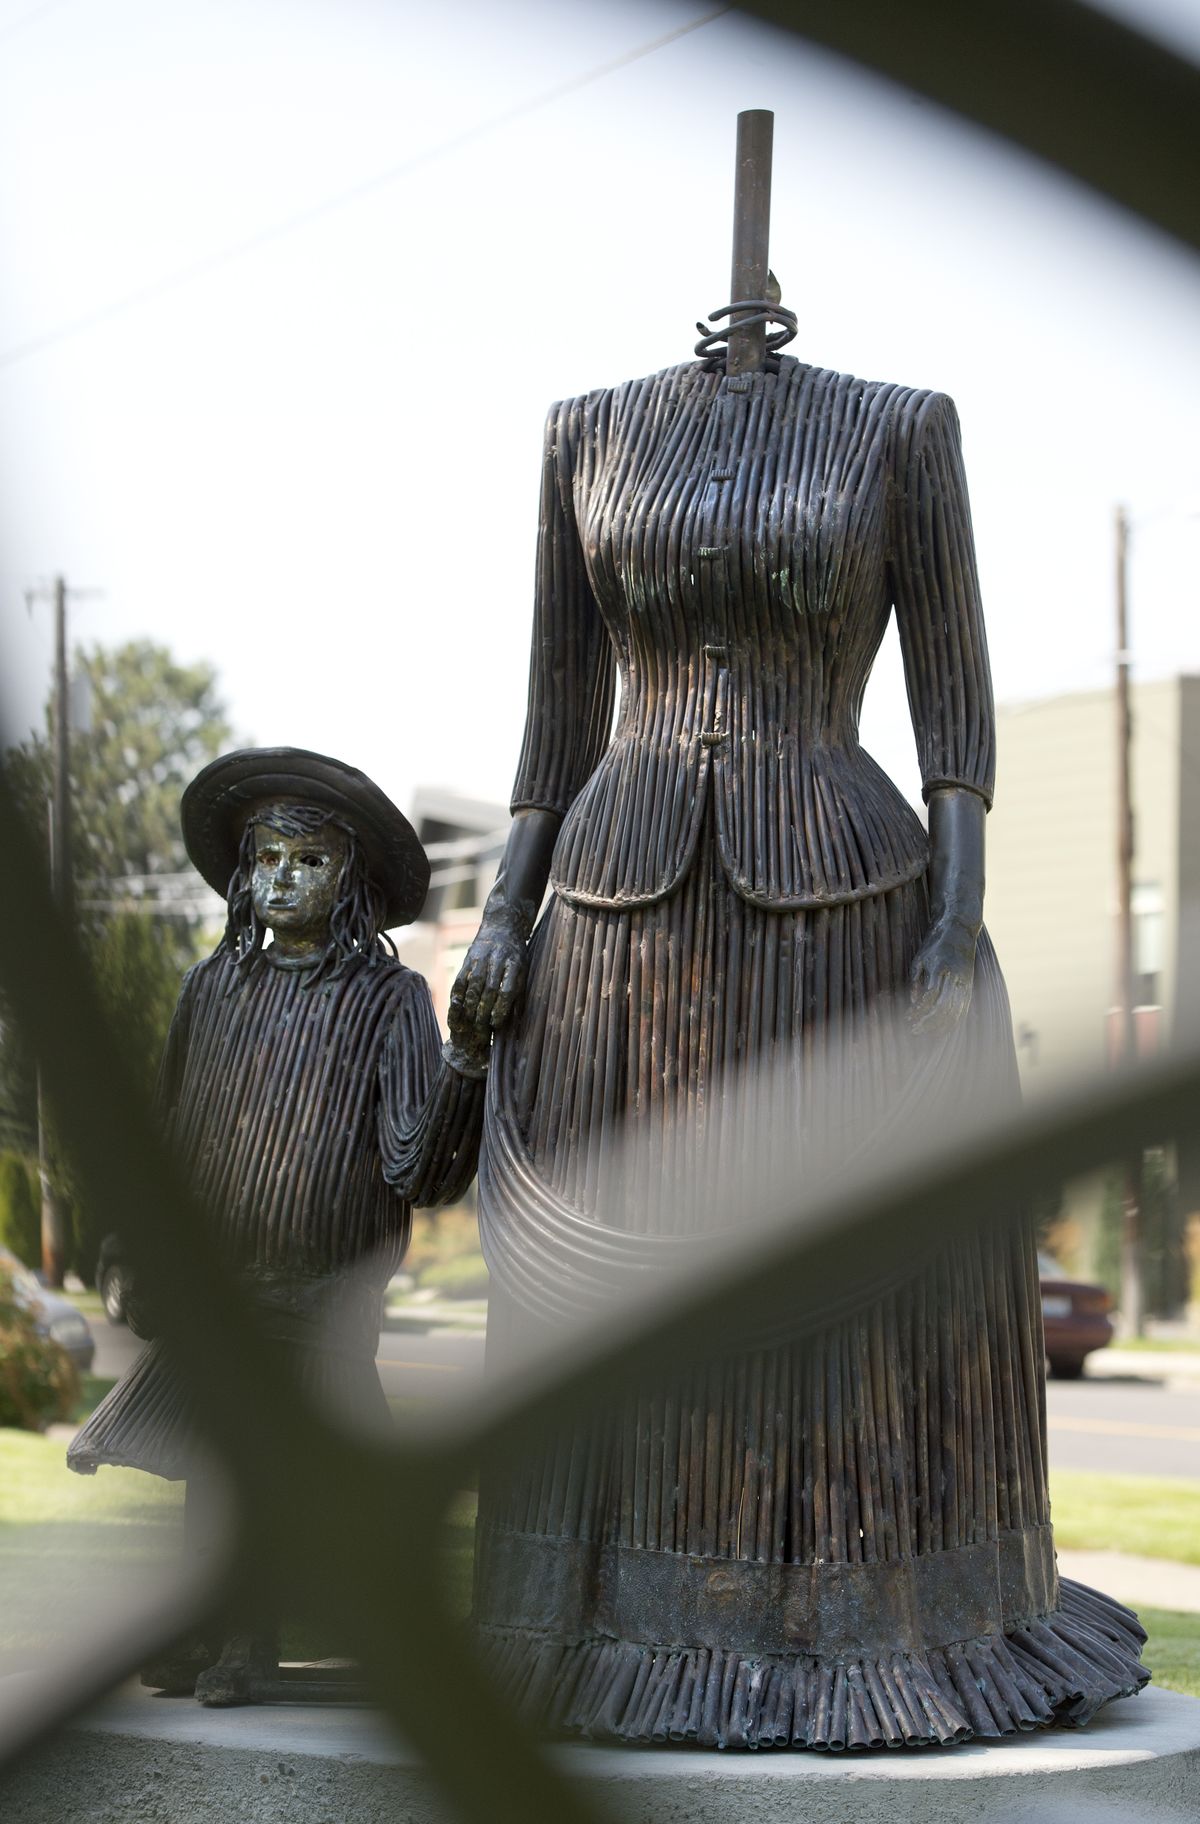 The headless statue stands at the entrance to Browne’s Addition on Wednesday. (Dan Pelle)